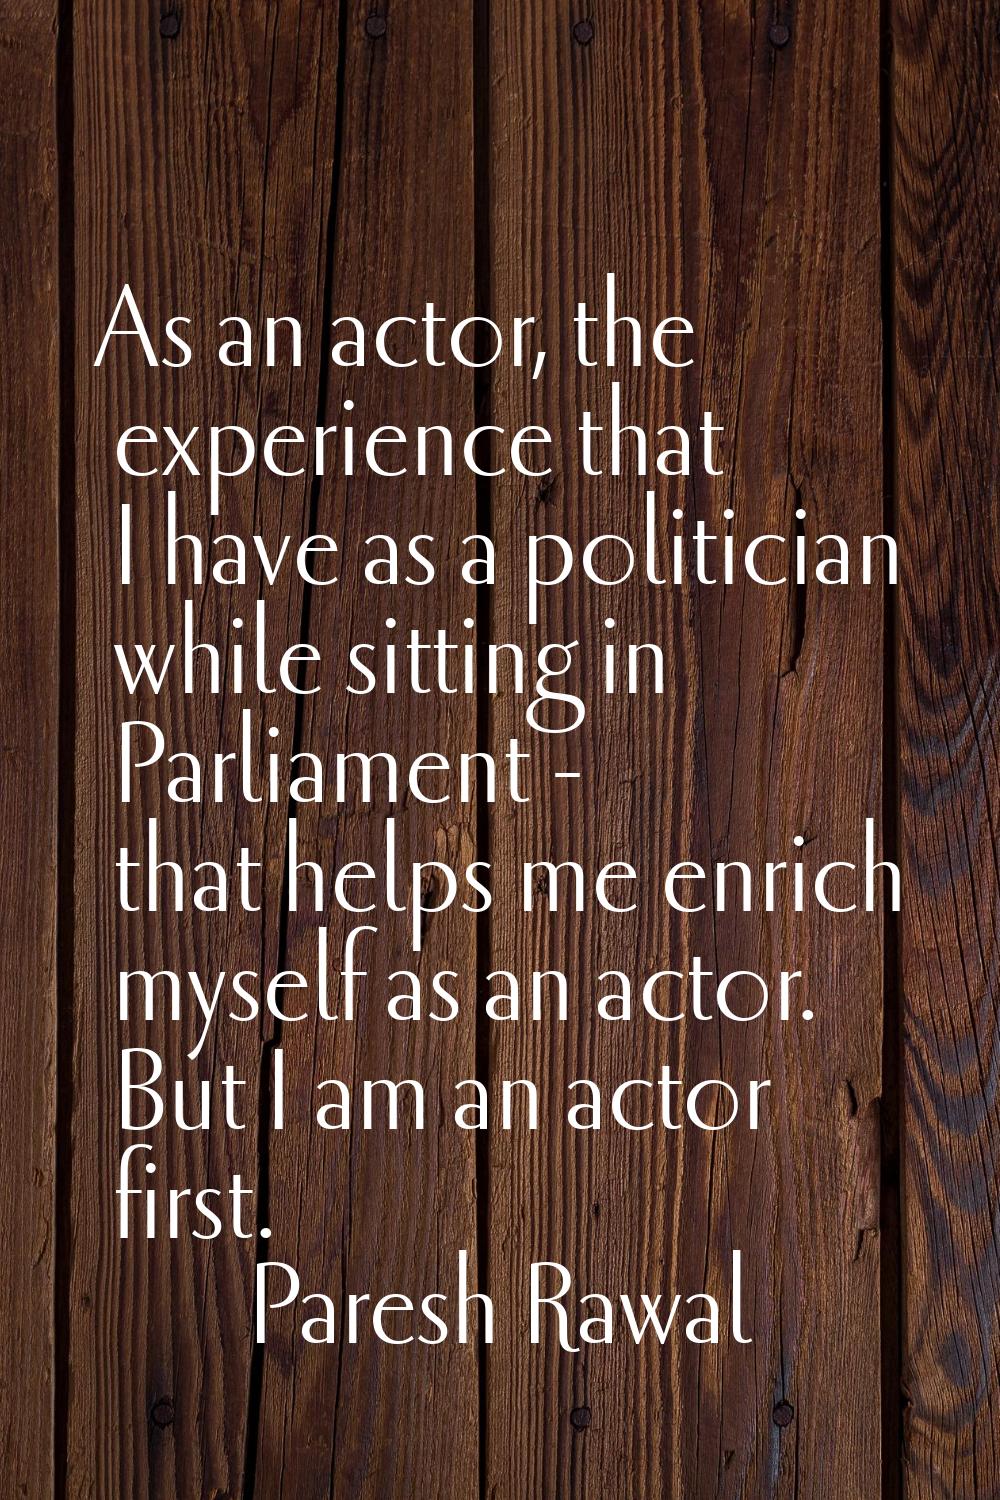 As an actor, the experience that I have as a politician while sitting in Parliament - that helps me